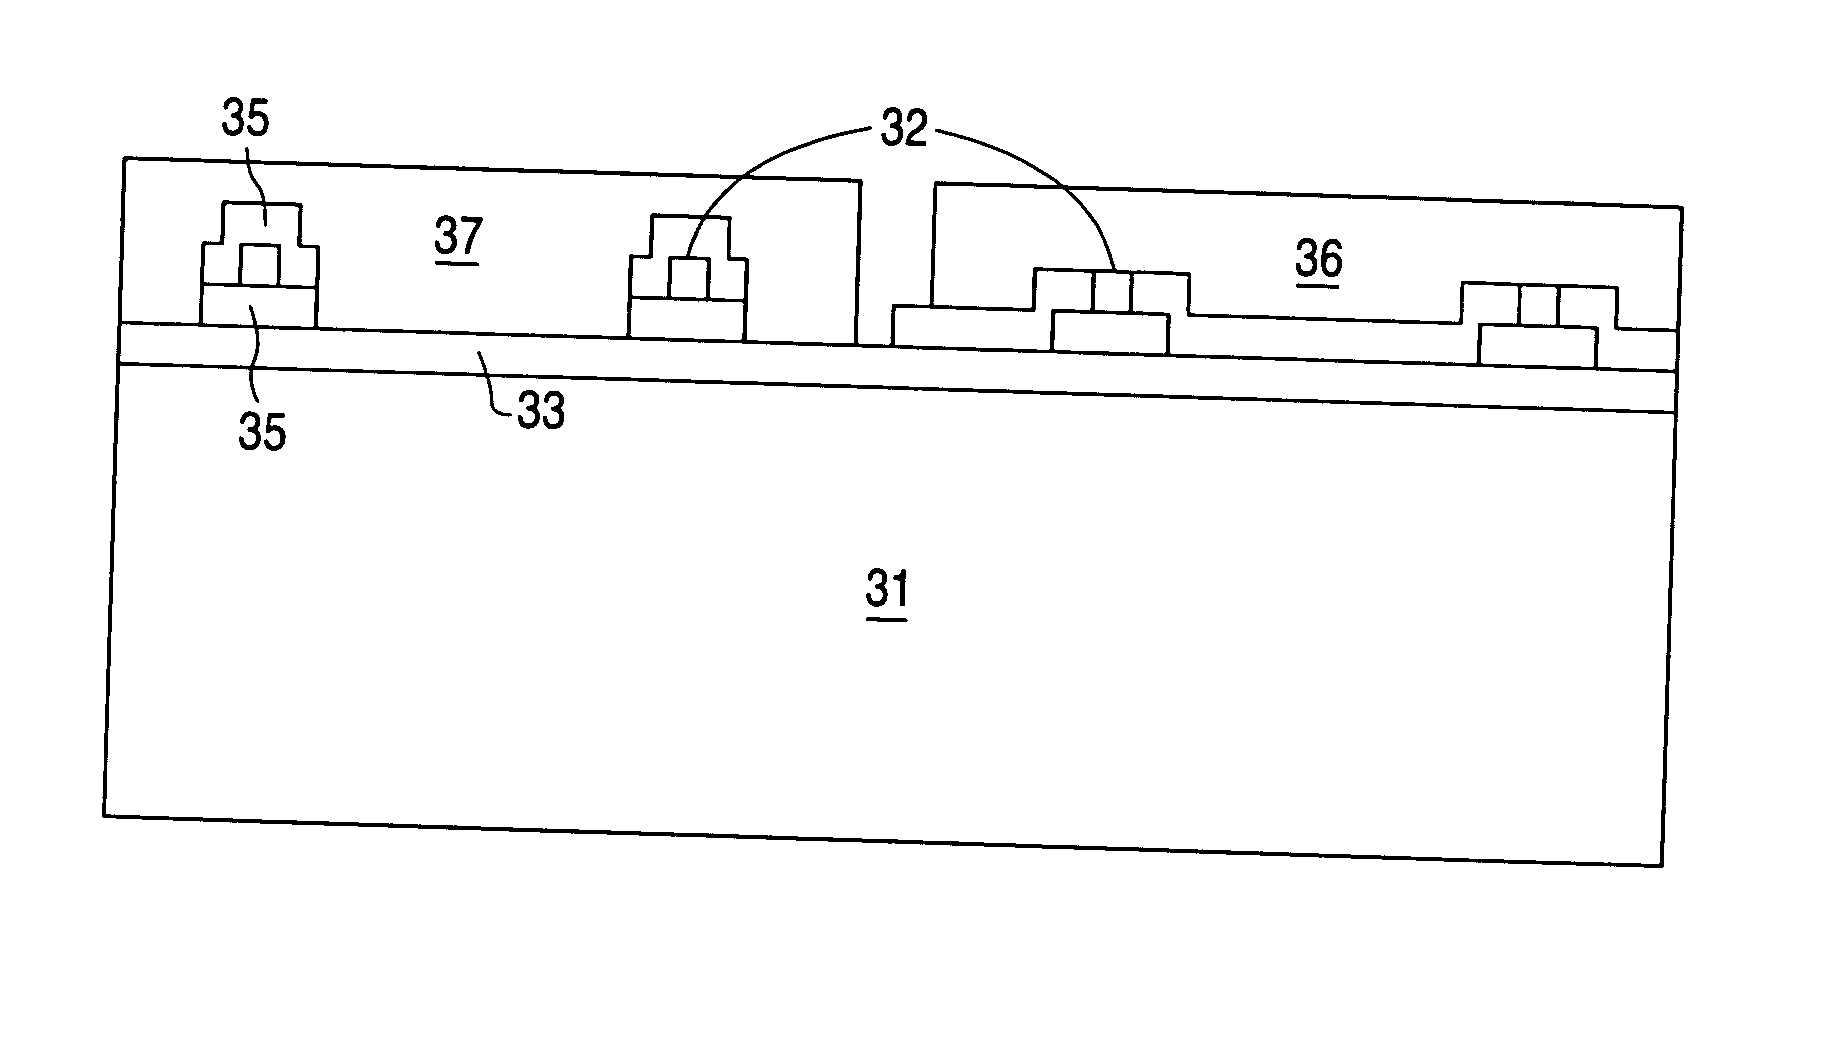 Package for a semiconductor light emitting device